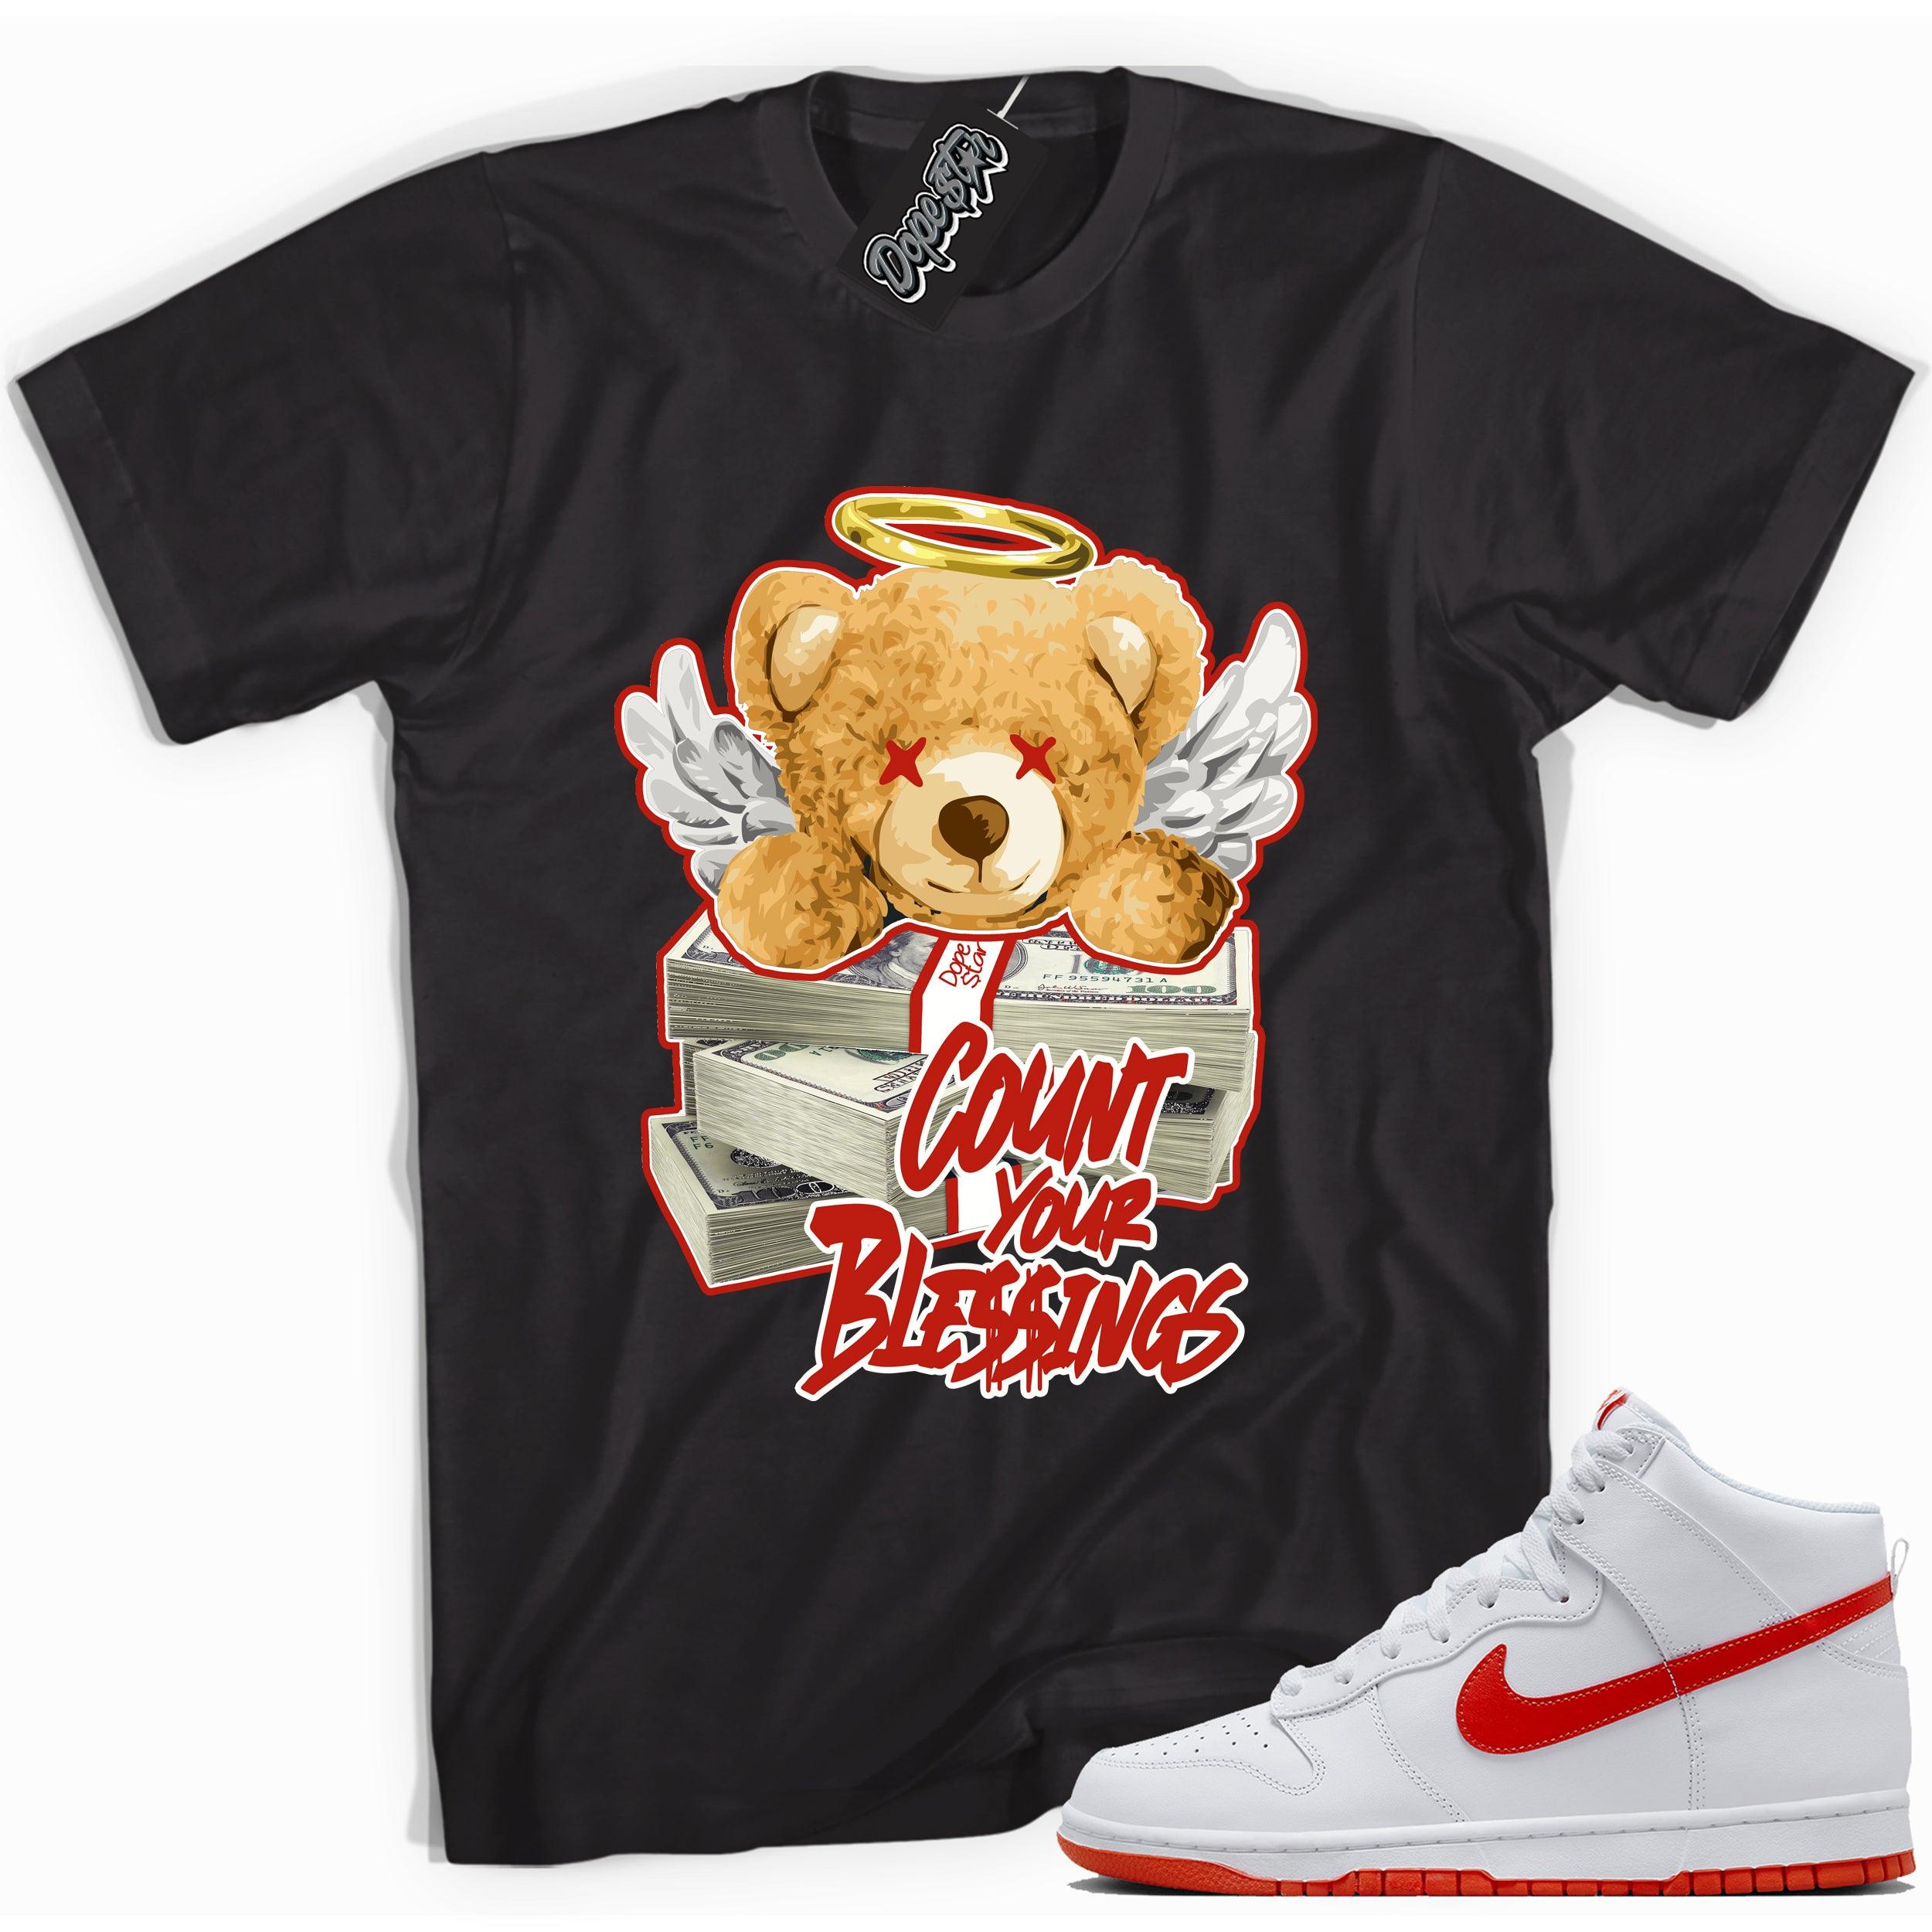 Cool black graphic tee with 'count your blessings' print, that perfectly matches Nike Dunk High White Picante Red sneakers.